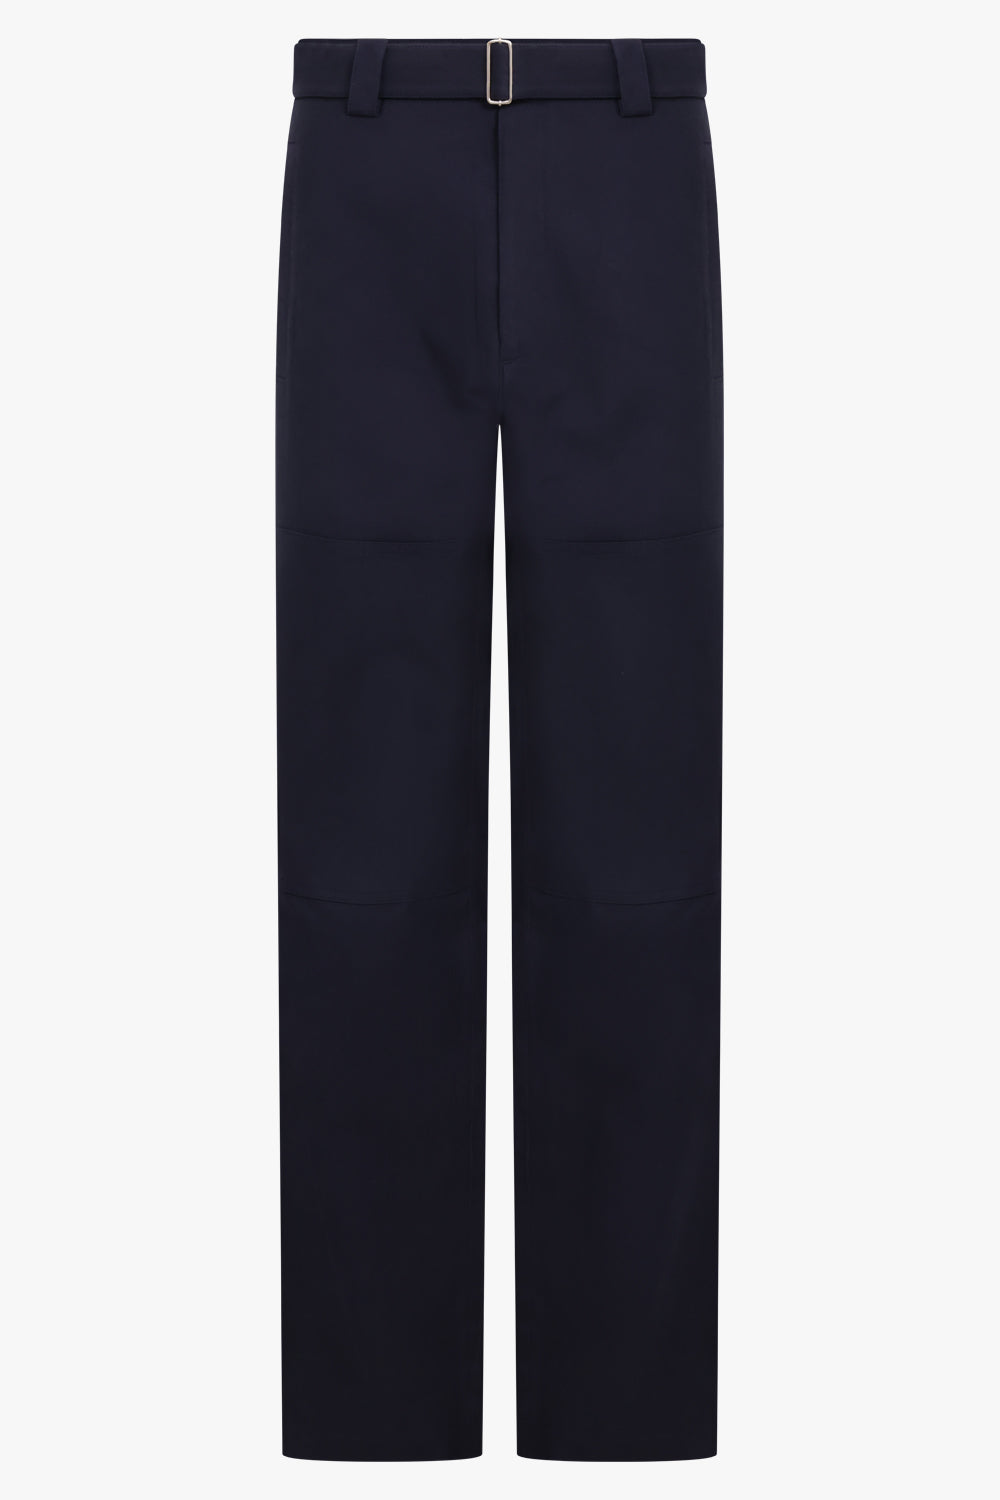 AFTER PRAY RTW Belted Double Knee Straight Pant | Navy